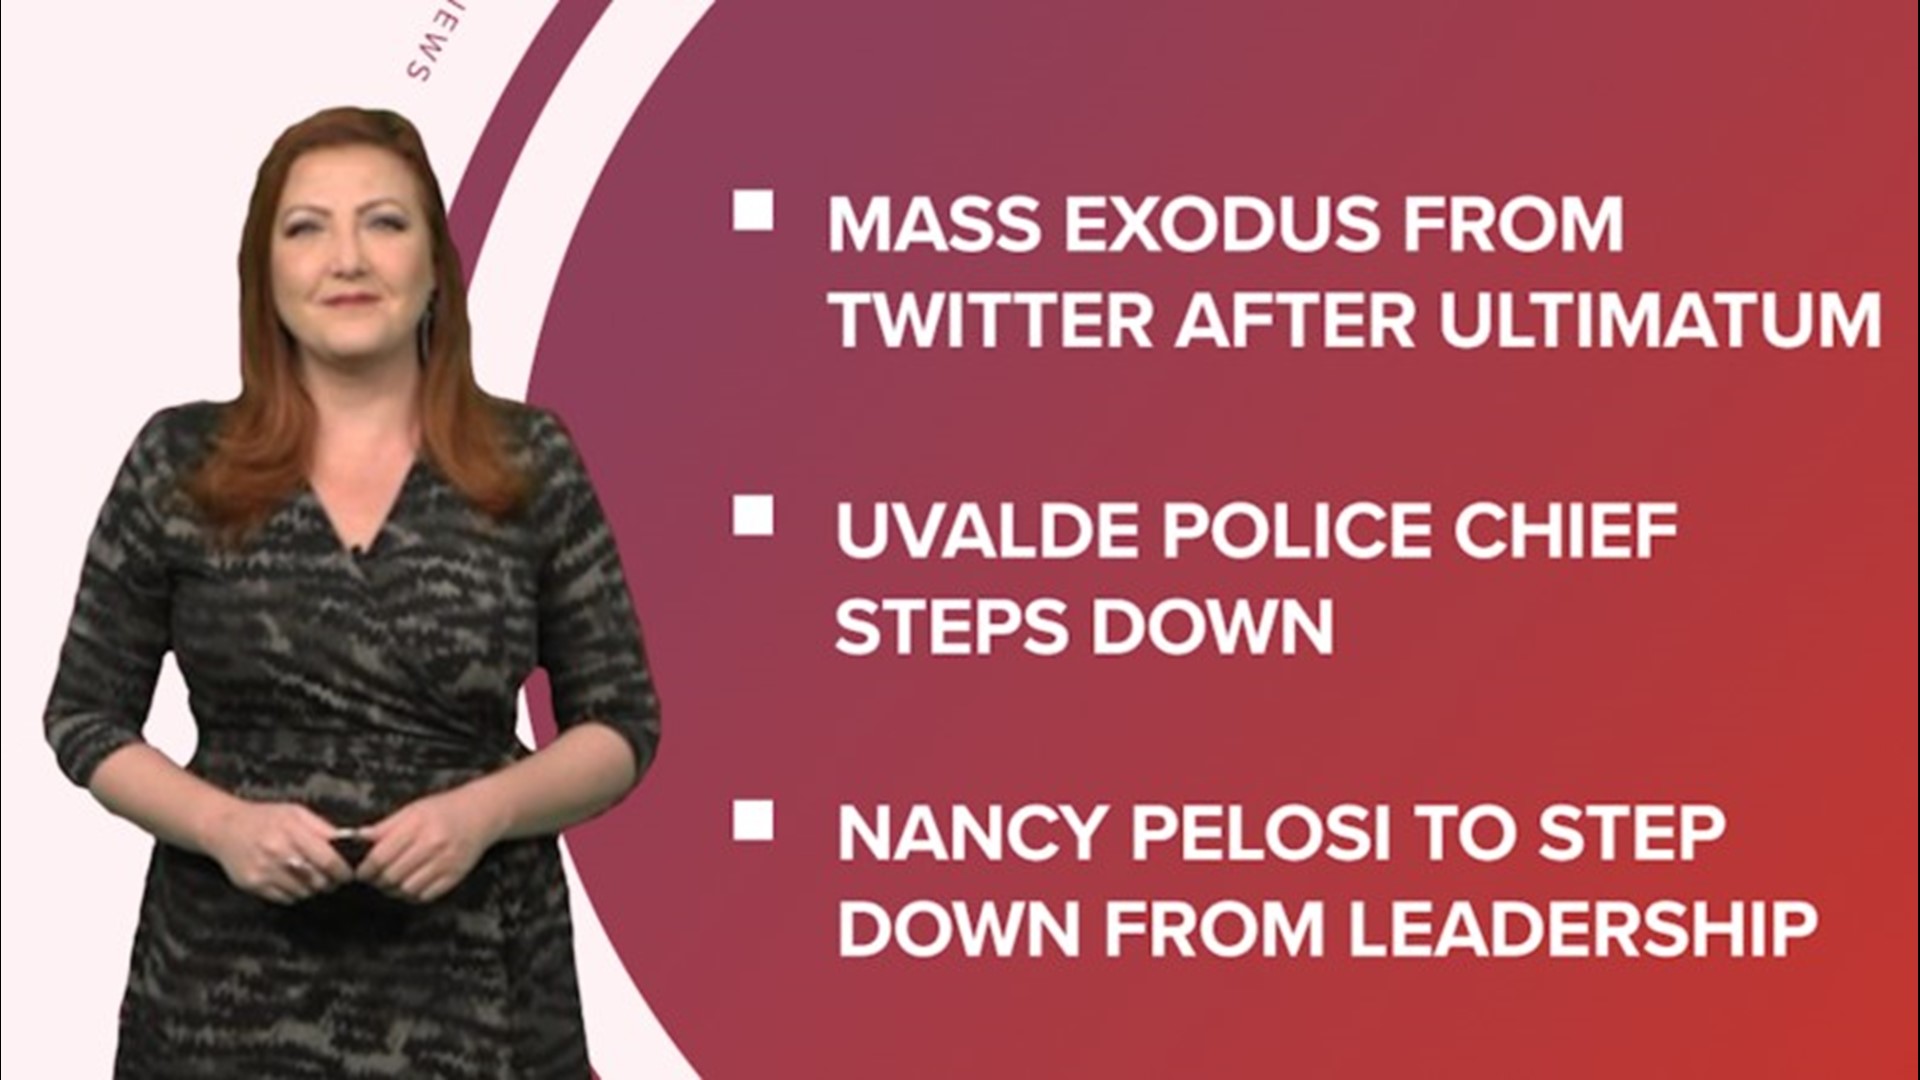 A look at what is happening in the news from more employees leaving Twitter to Nancy Pelosi stepping down from leadership and more Taylor Swift ticket drama.